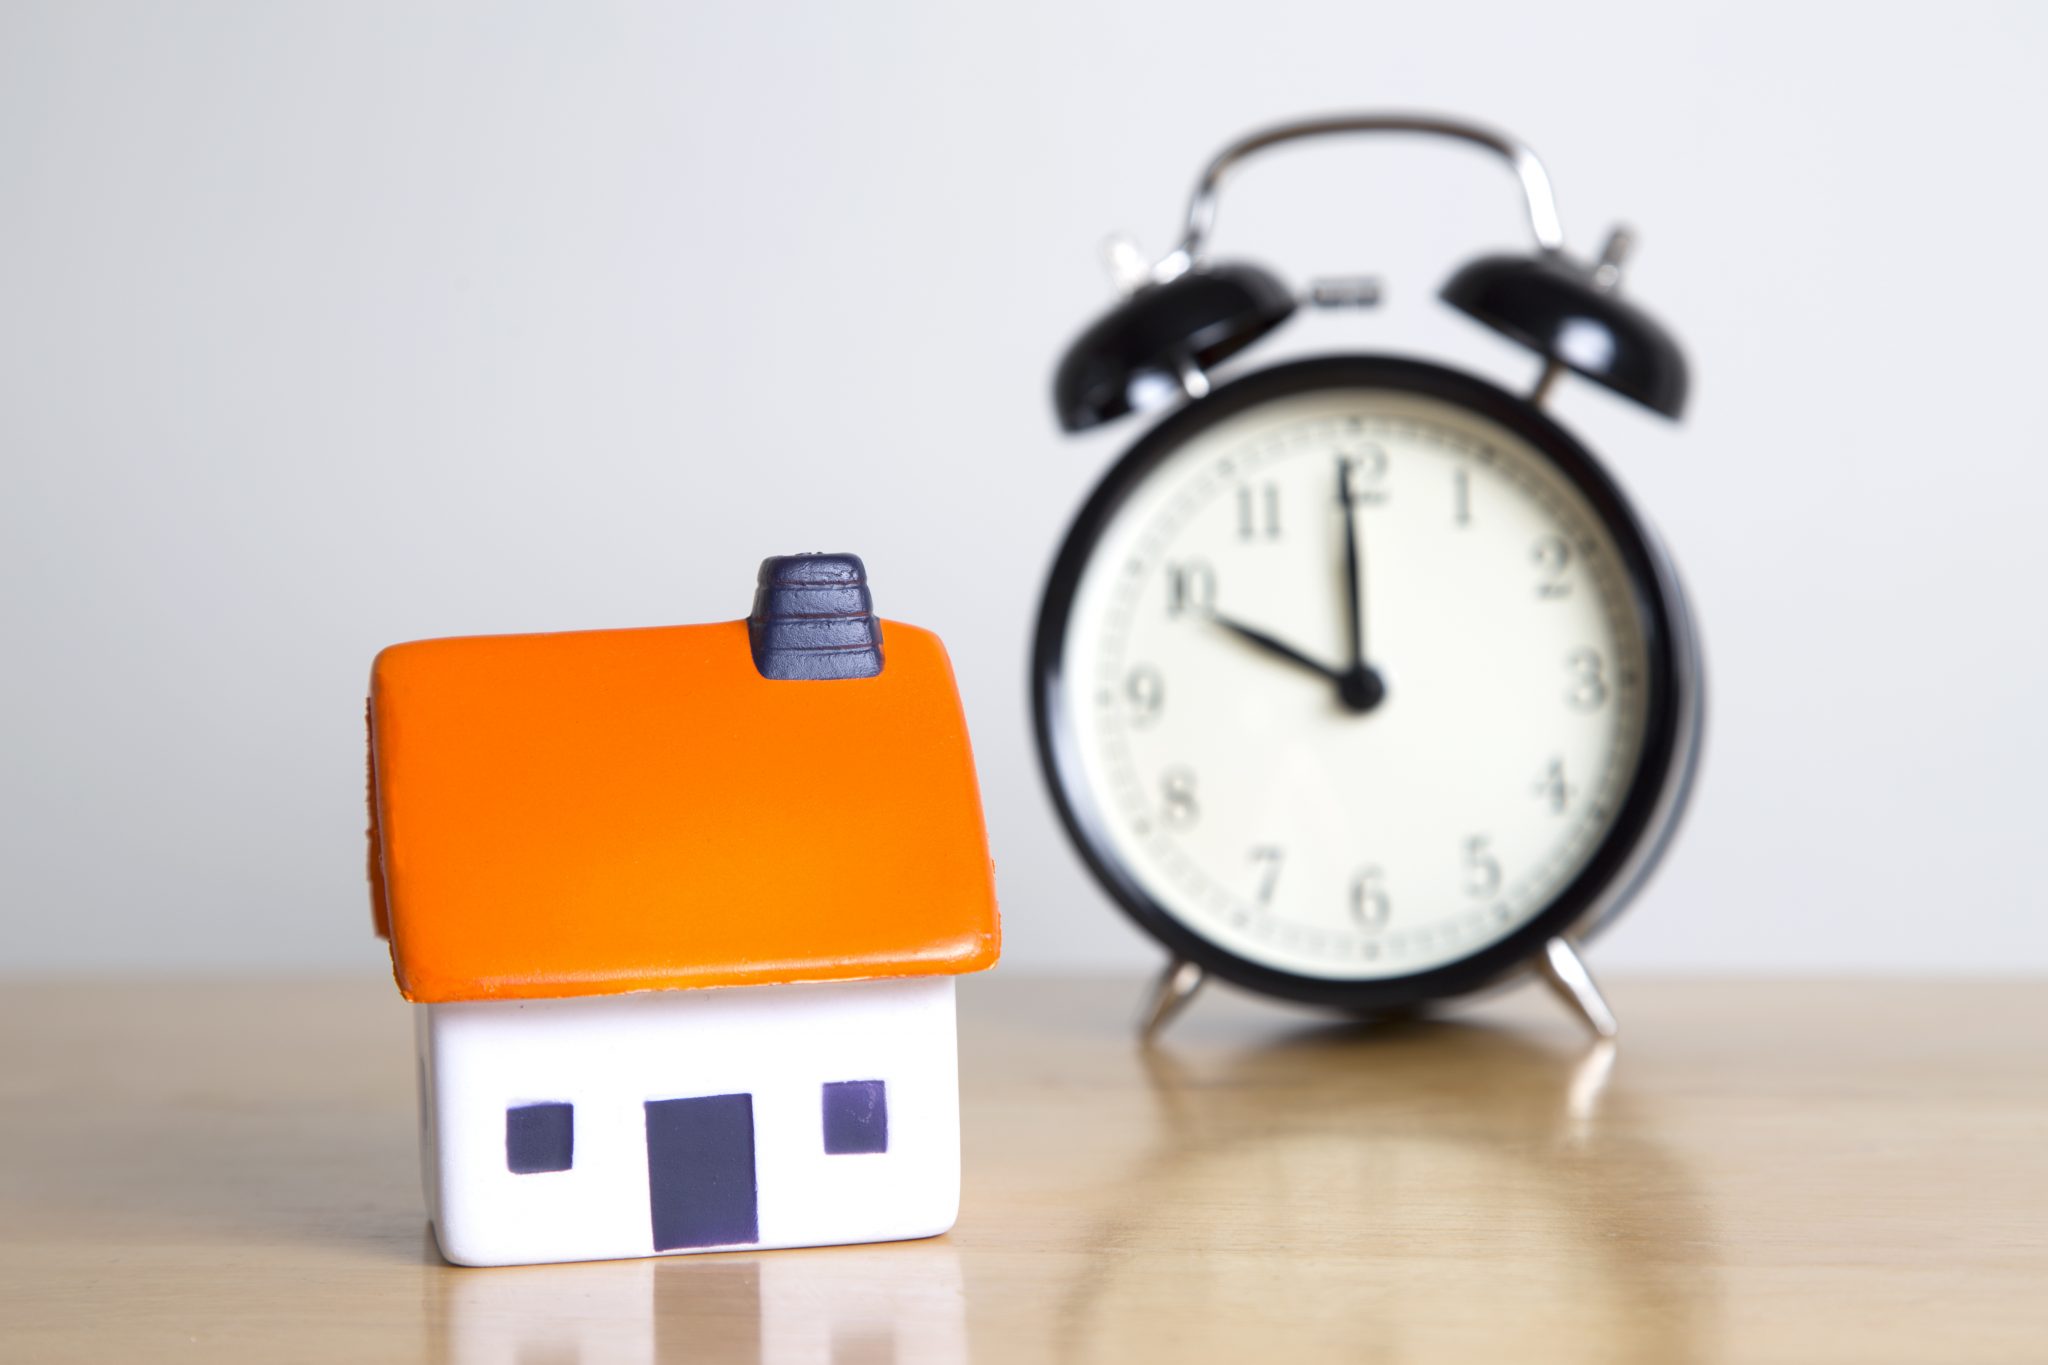 WHEN IS THE BEST TIME TO BUY A HOUSE?